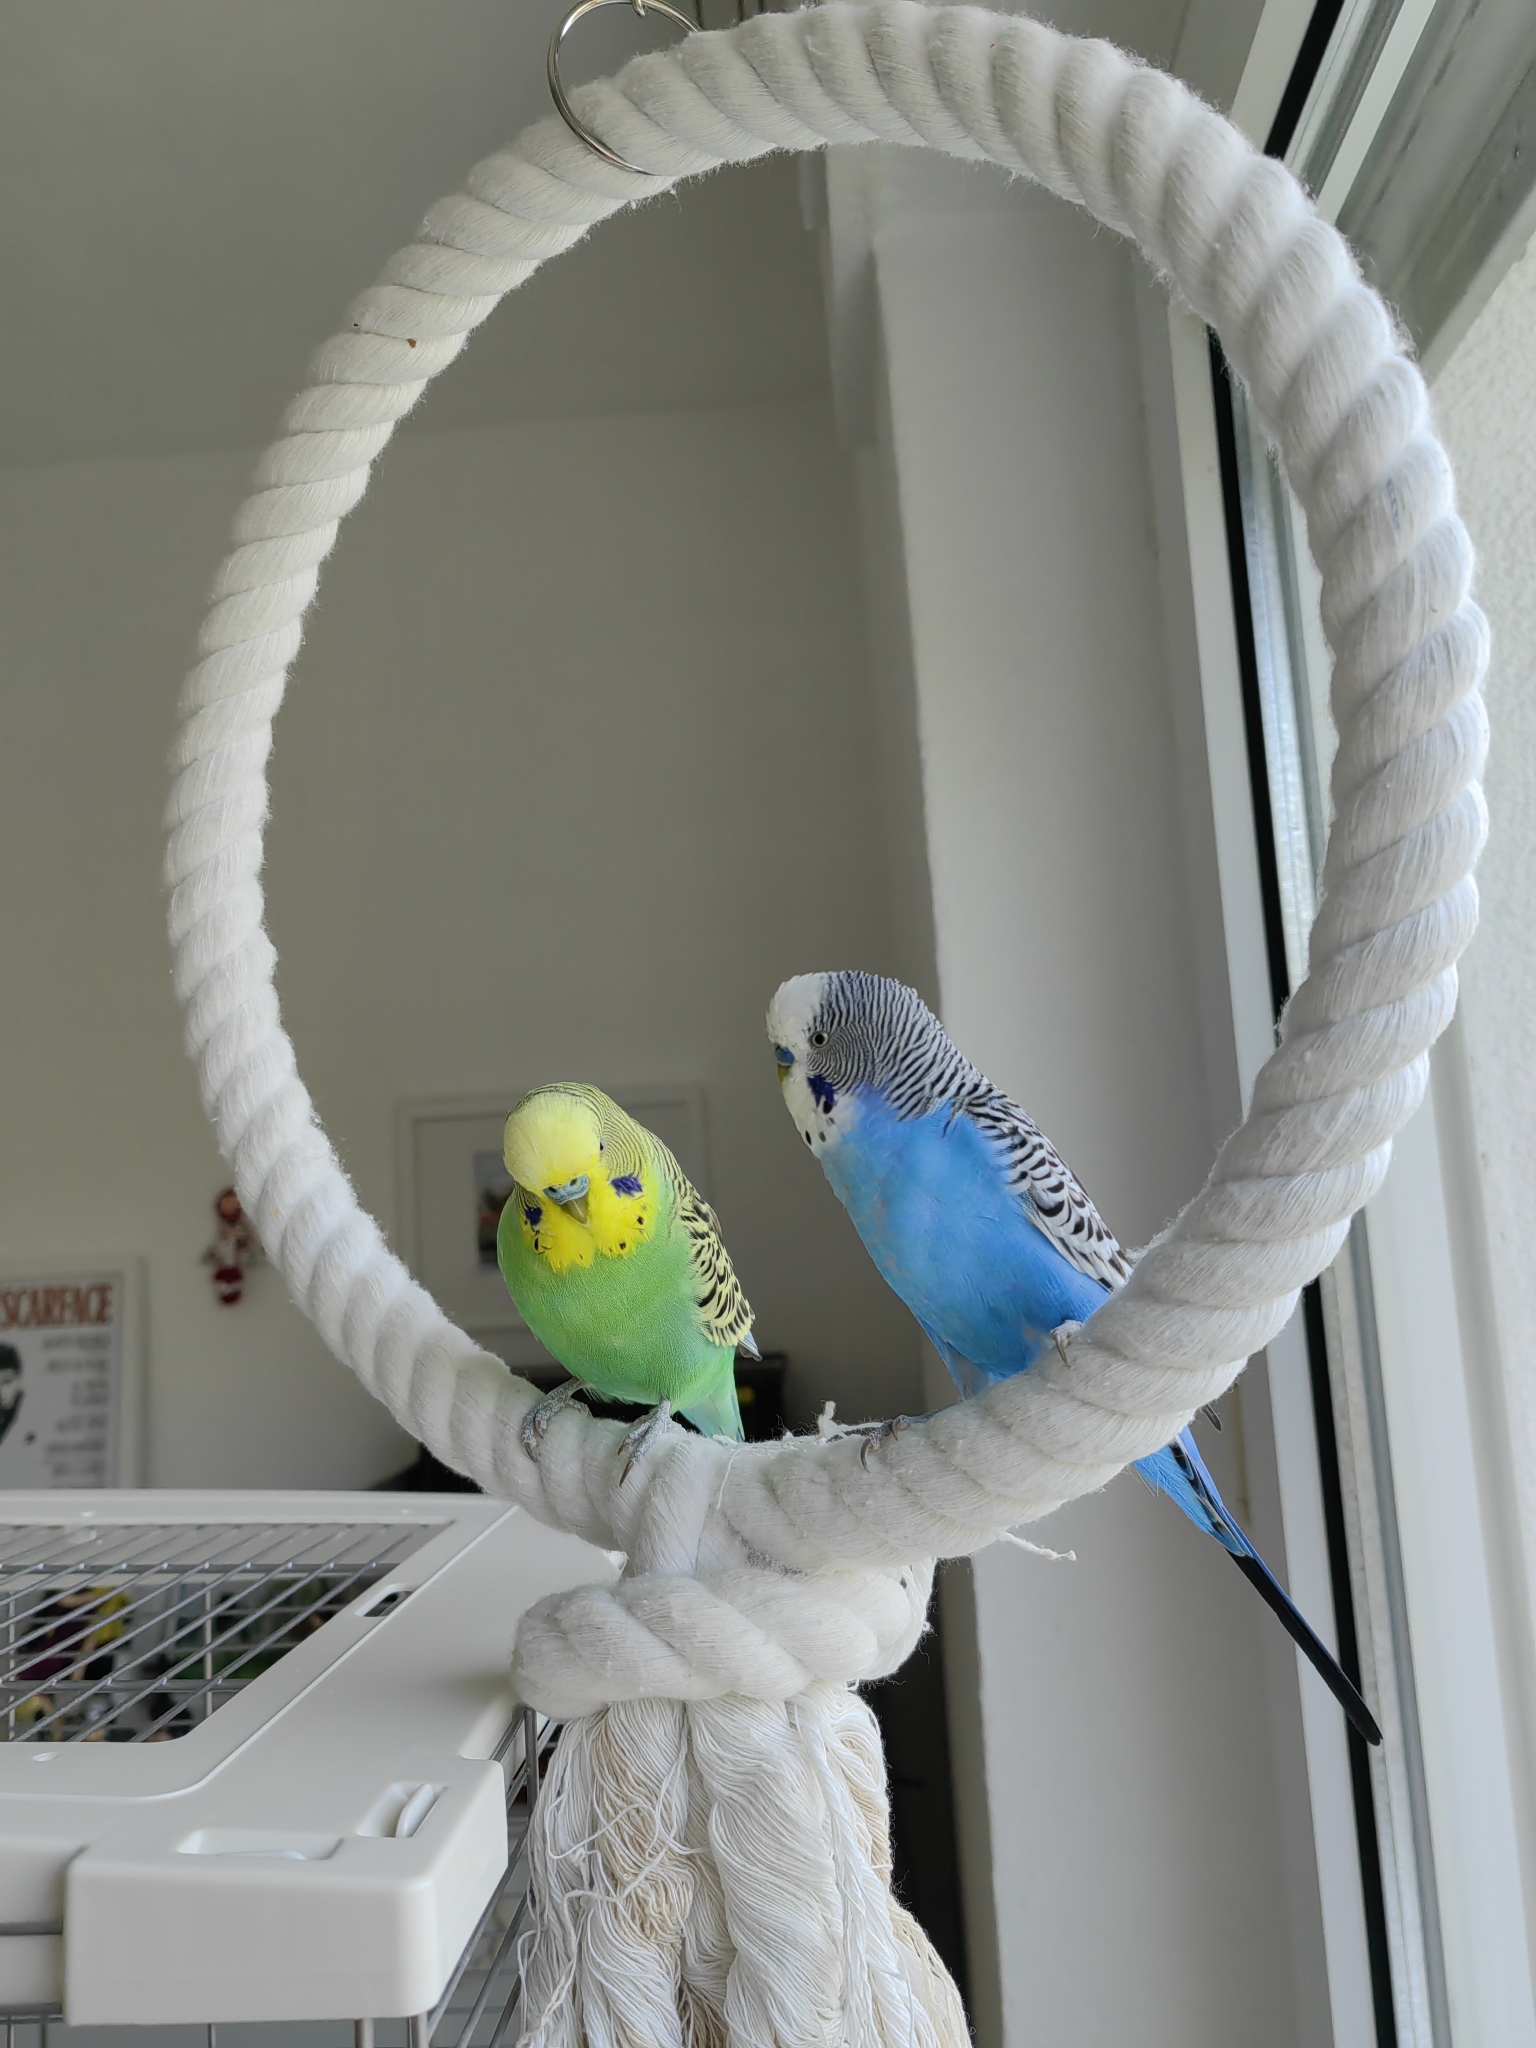 What's Too Cold or Too Hot for a Budgie?